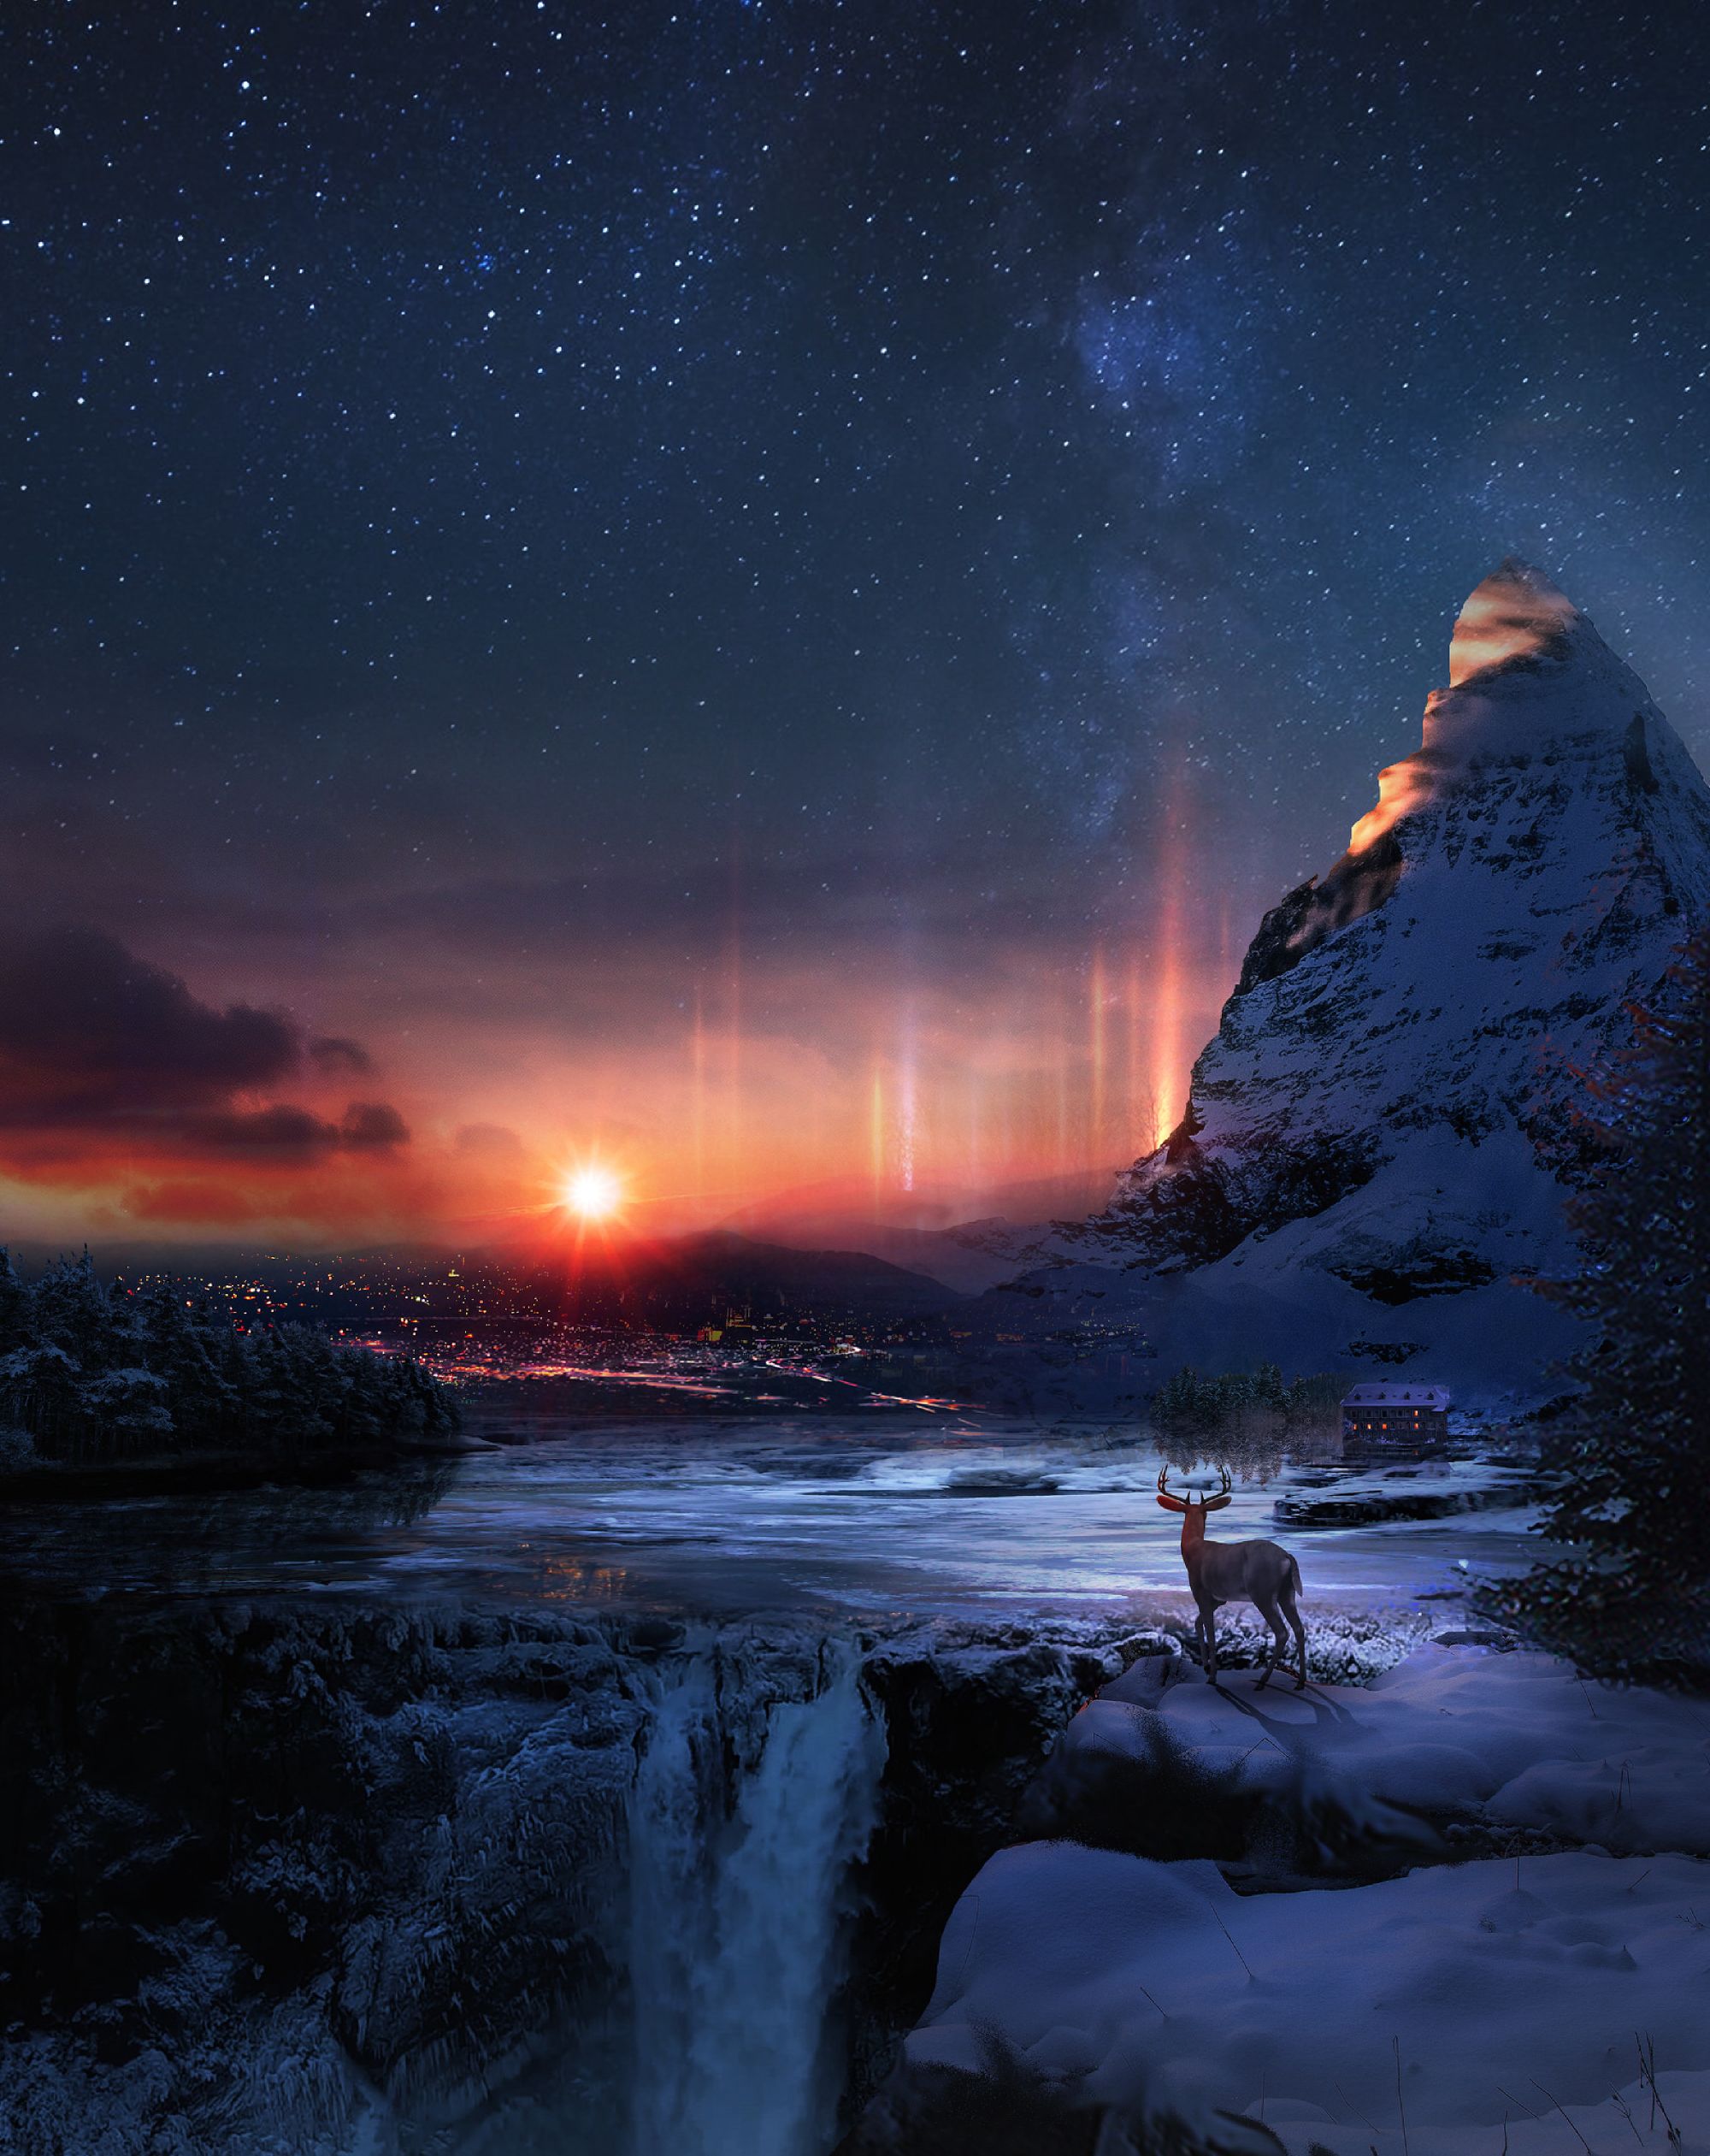 155979 download wallpaper winter, snow, art, deer, night screensavers and pictures for free